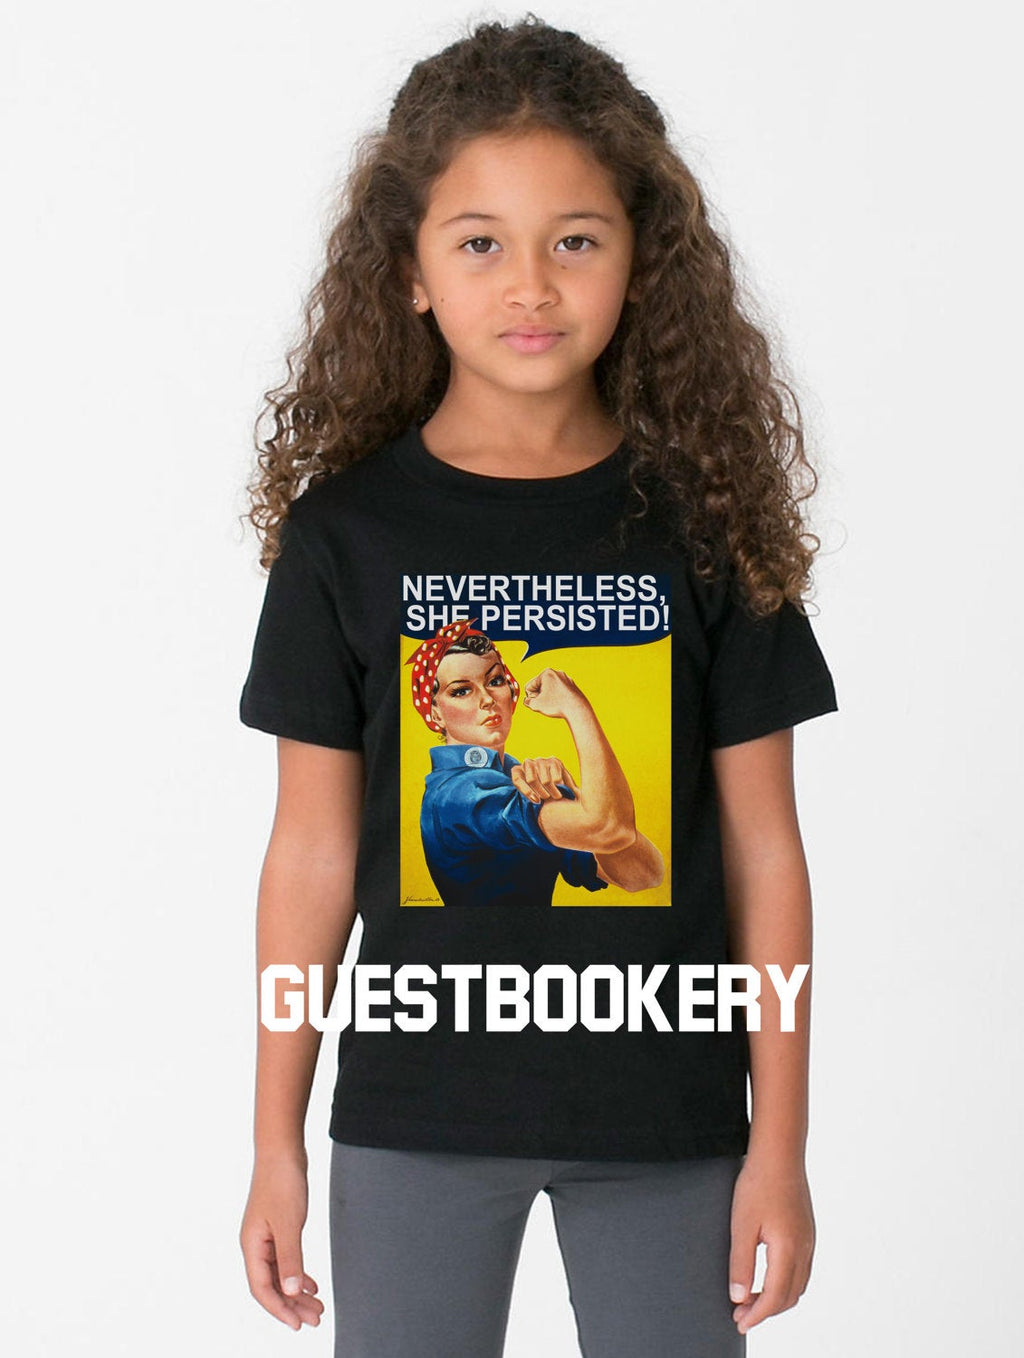 Nevertheless She Persisted Kid's T-shirt - Guestbookery